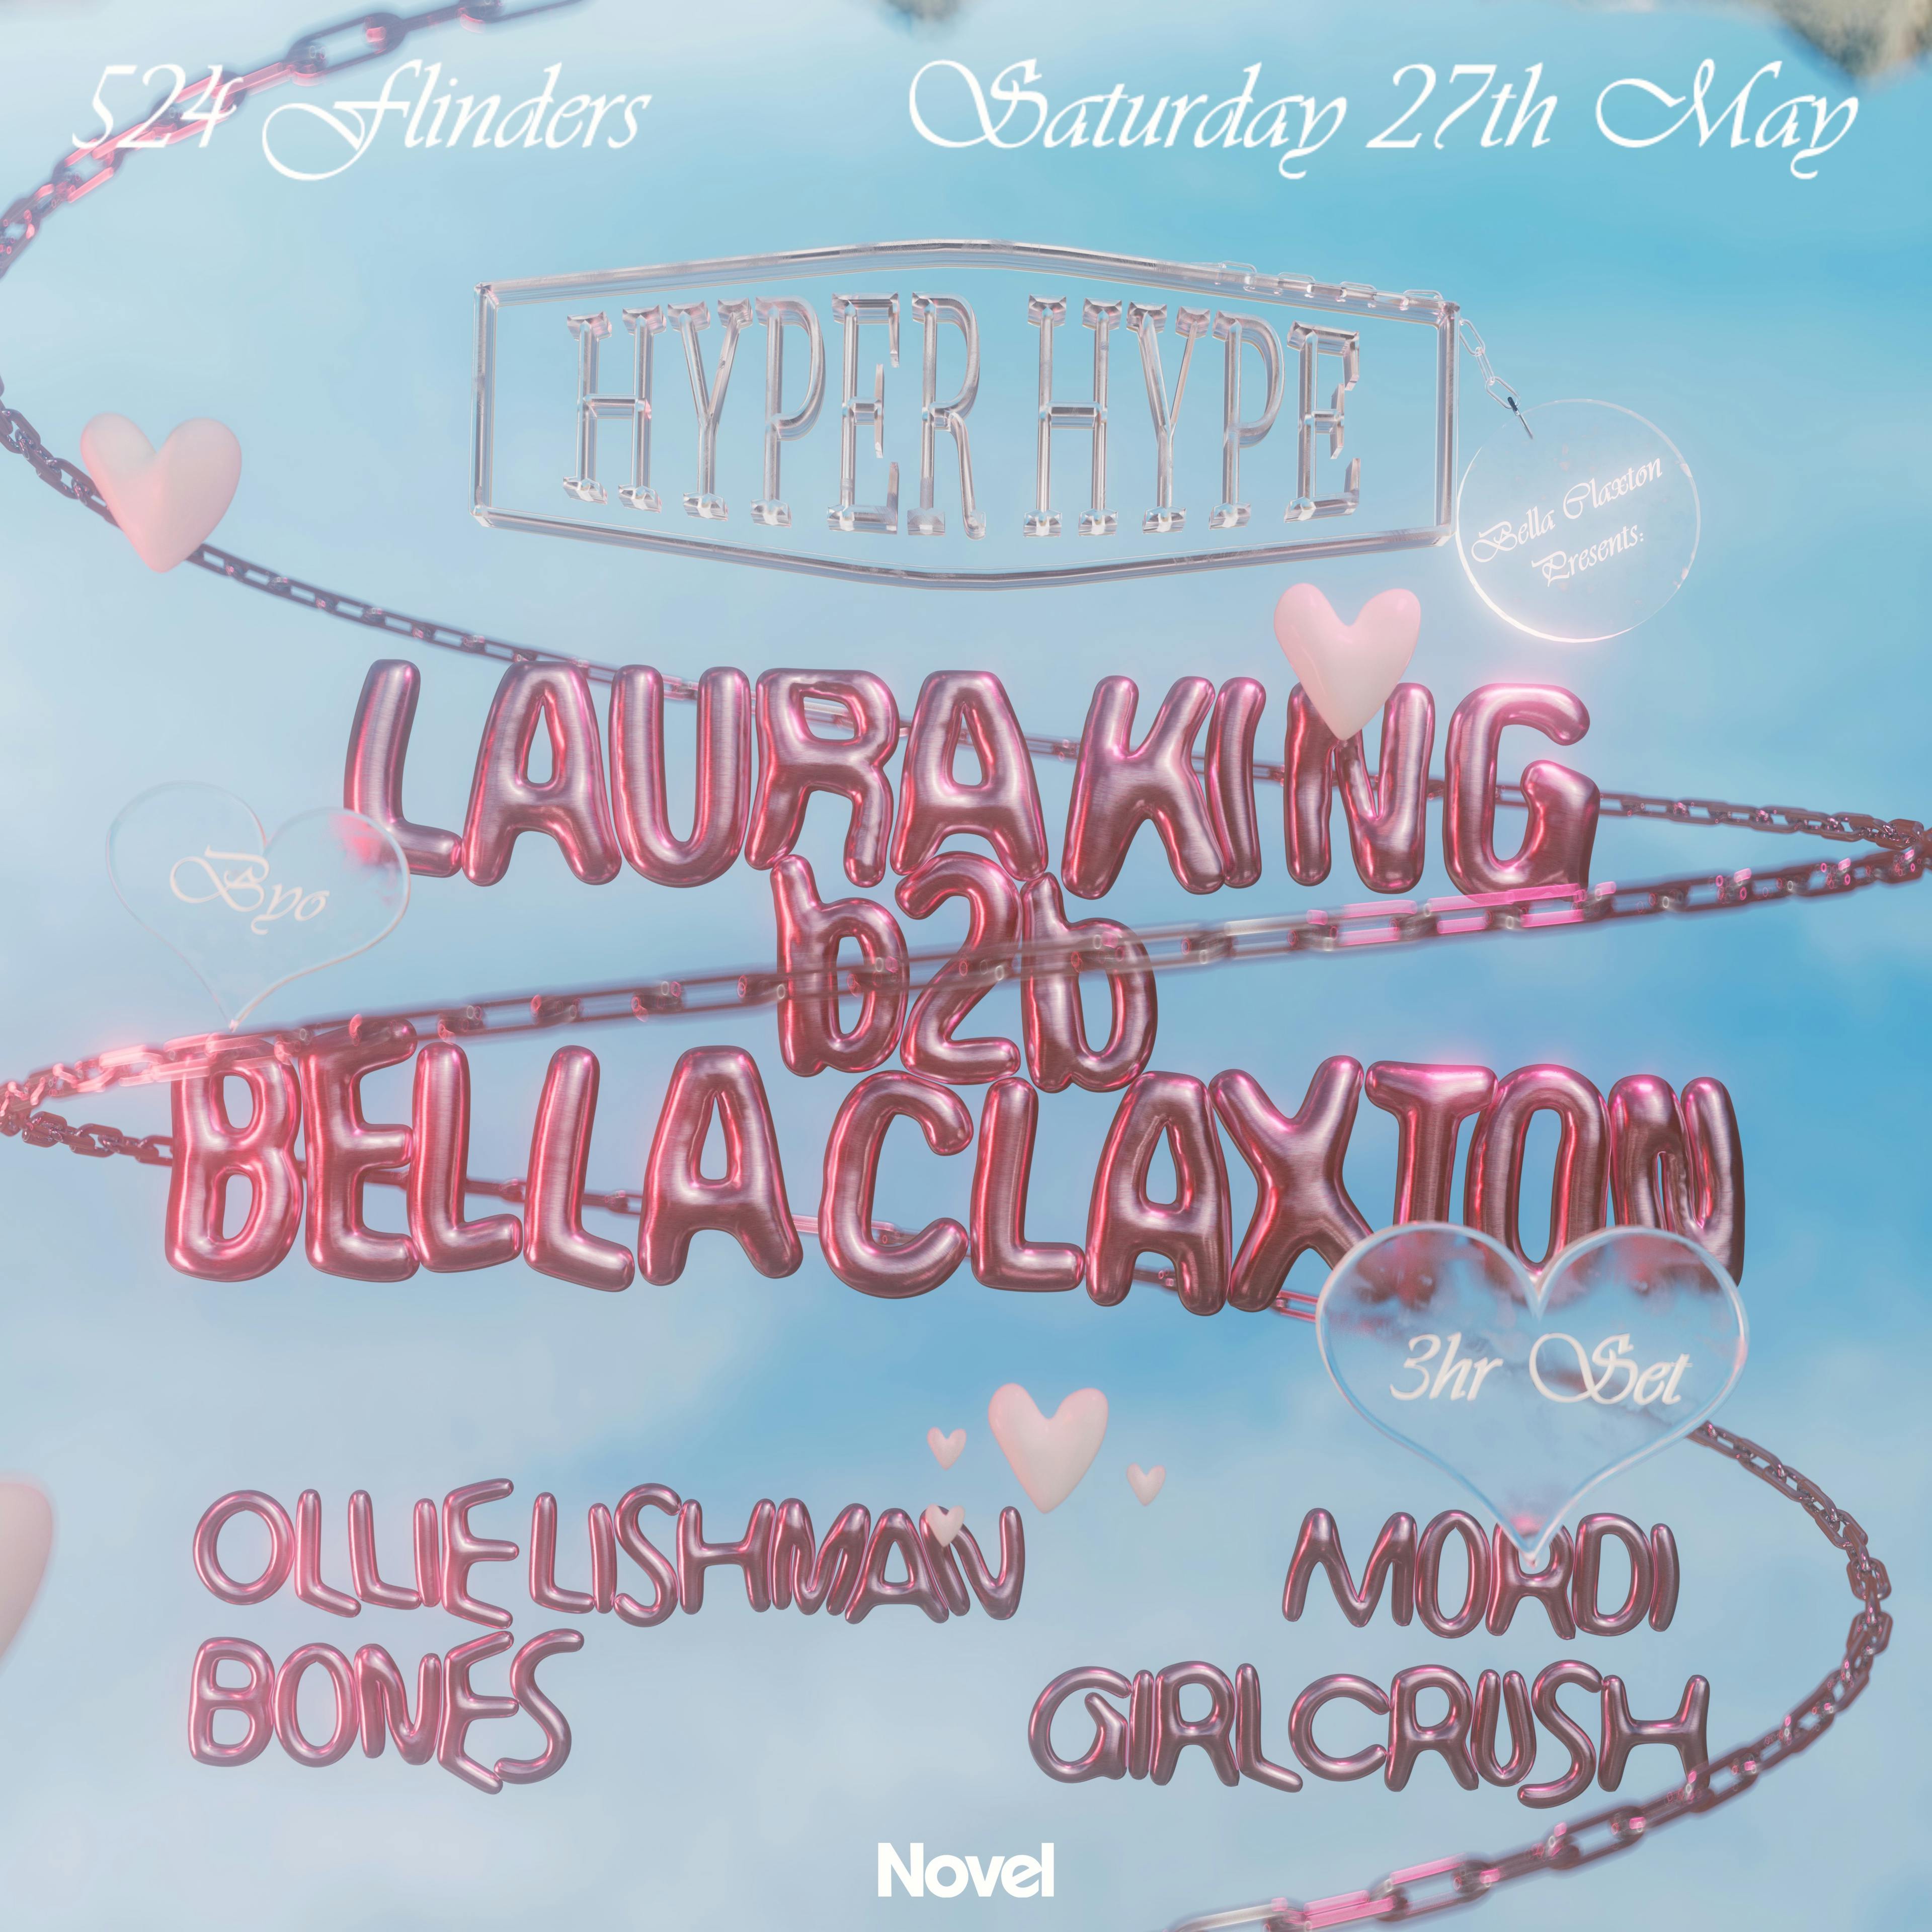 Hyper Hype with Laura King b2b Bella Claxton (3hrs) - BYO